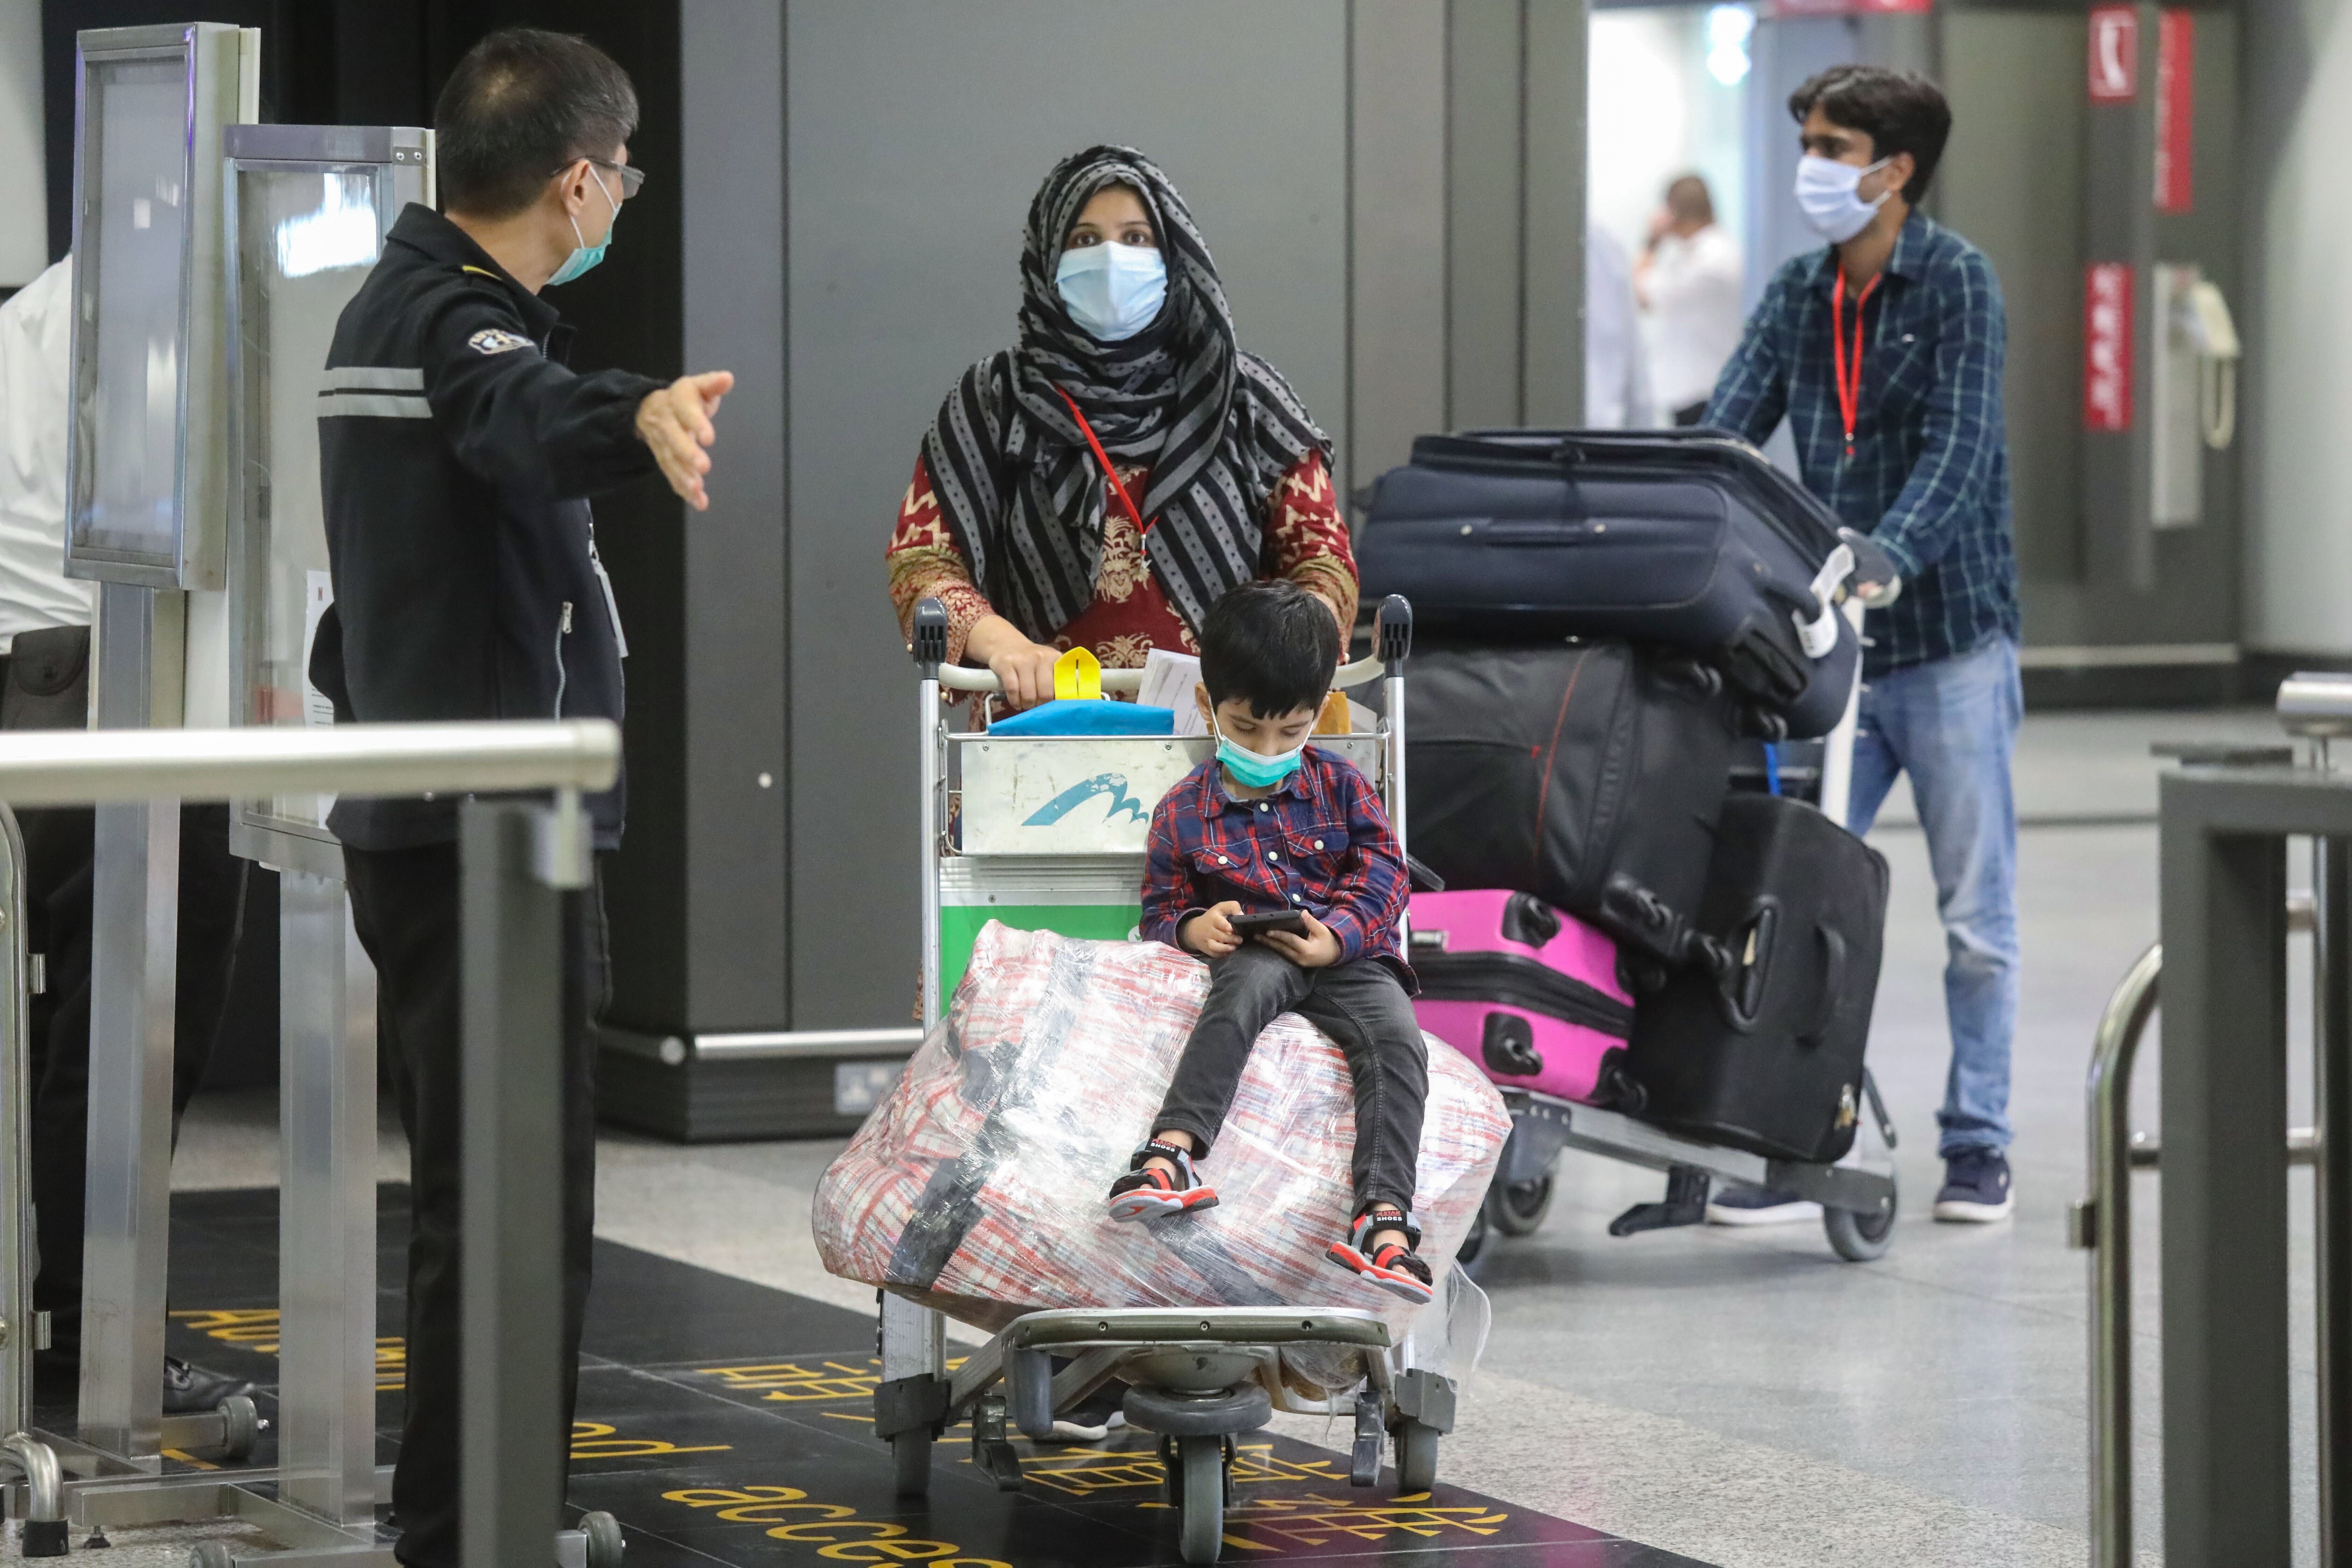 Coronavirus Hong Kong Records Fifth Day In Row Of No New Infections But Experts Say Imported Cases Likely In Coming Days As Stranded Residents Return From Pakistan South China Morning Post